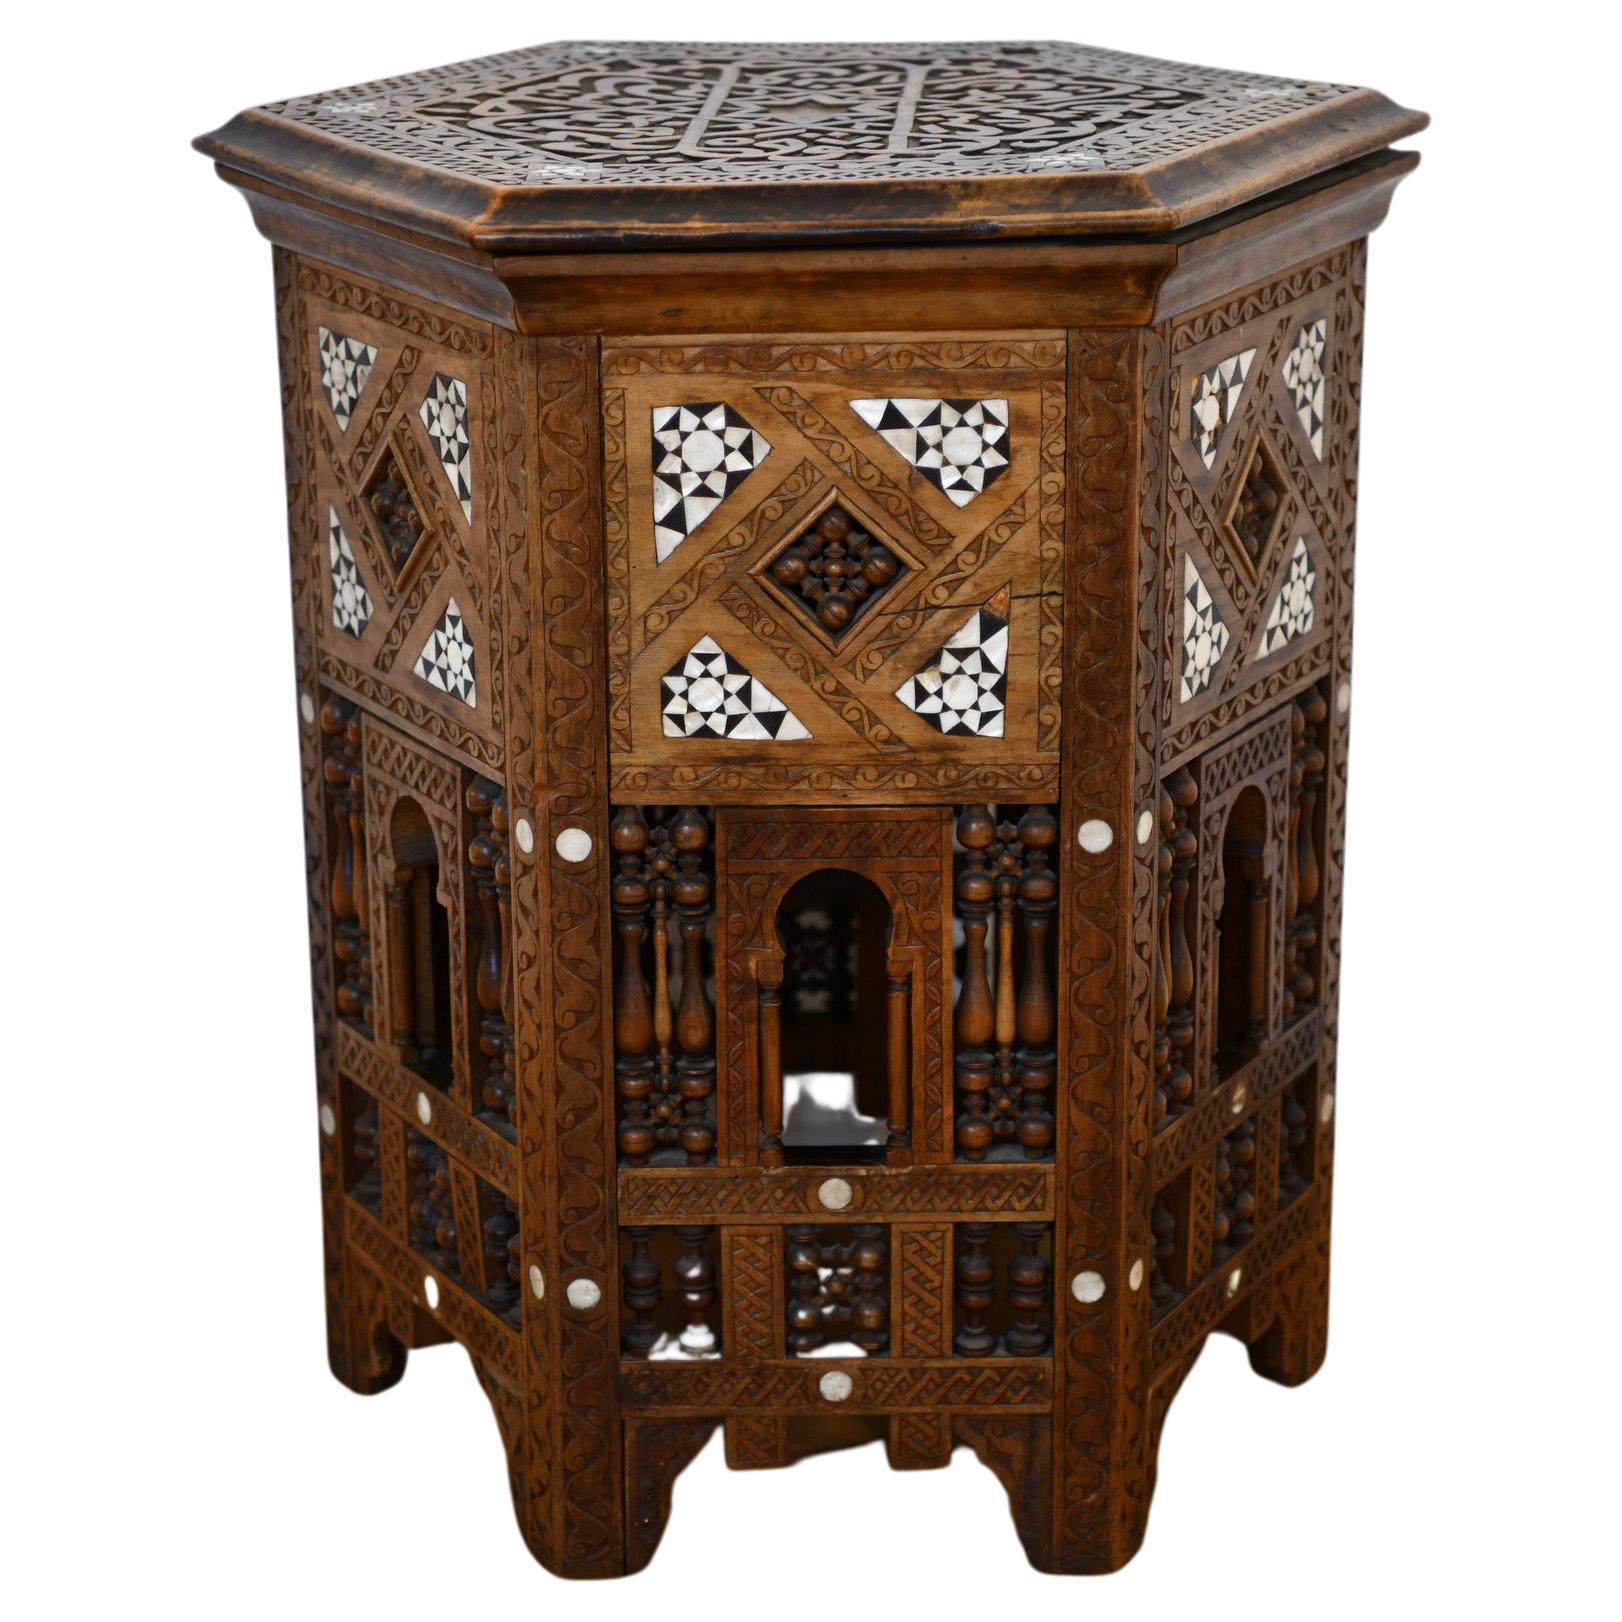 Syrian Tabouret with Mother of Pearl